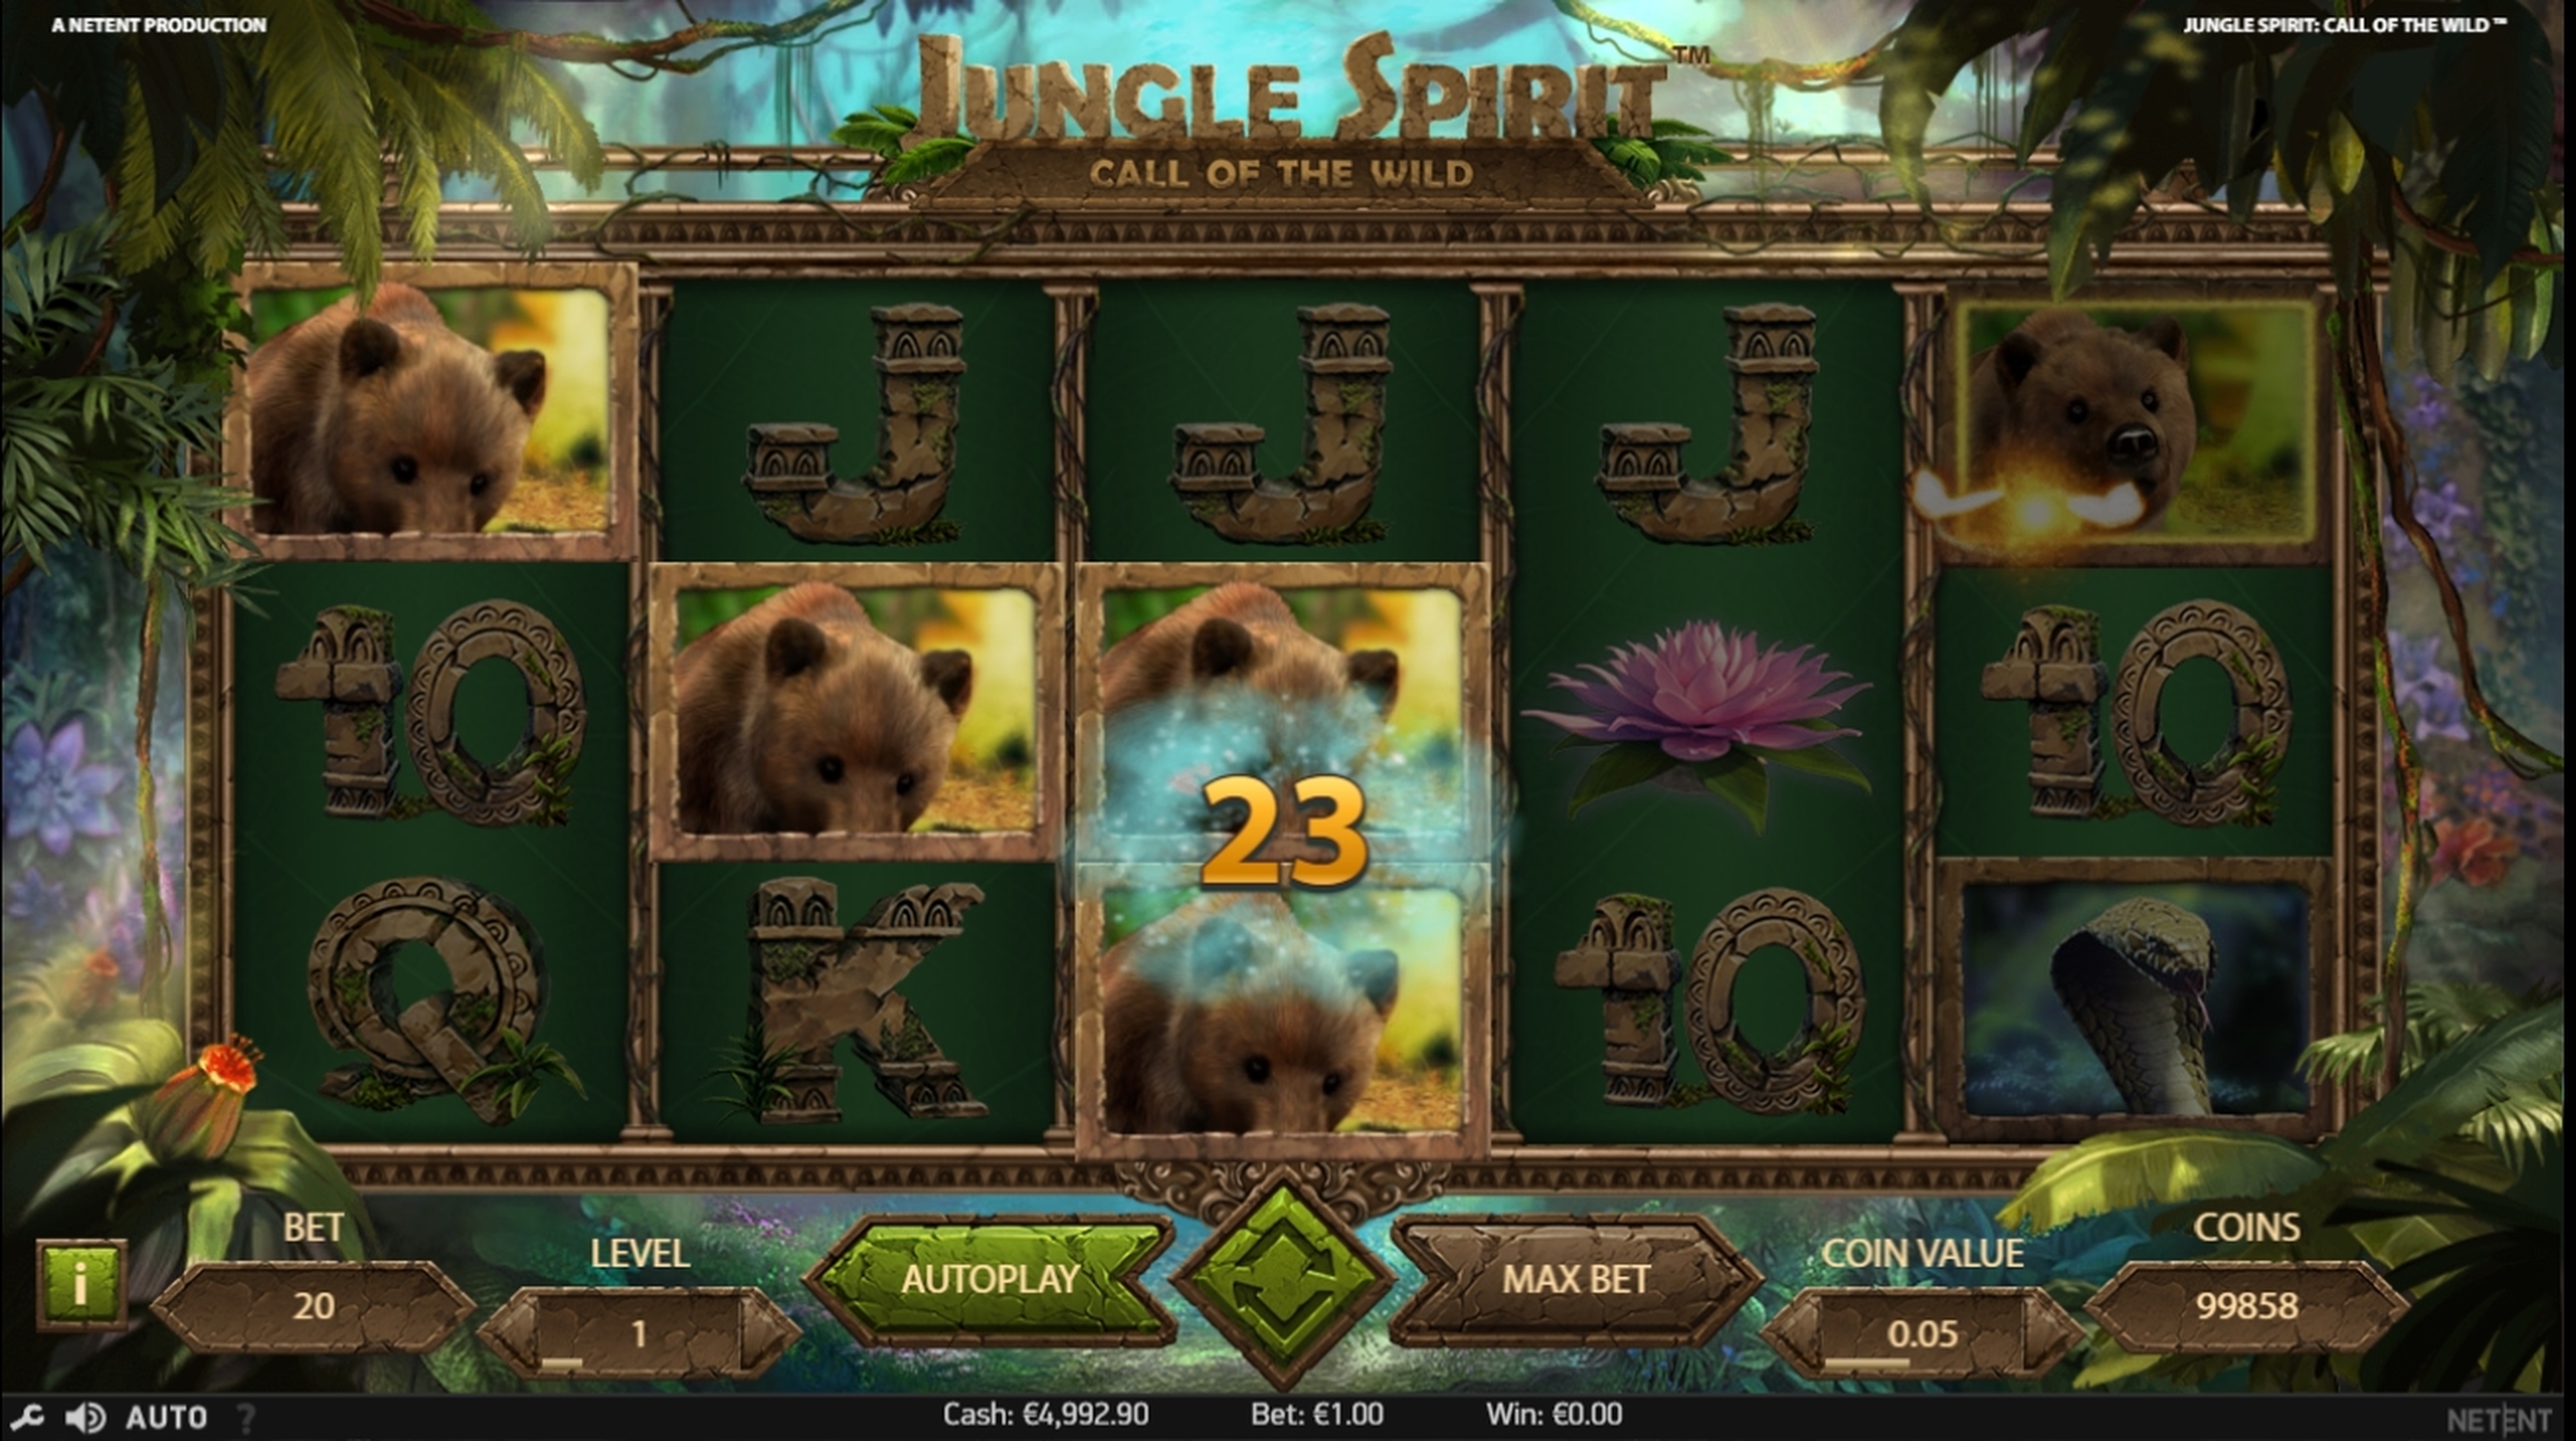 Win Money in Jungle Spirit: Call of the Wild Free Slot Game by NetEnt